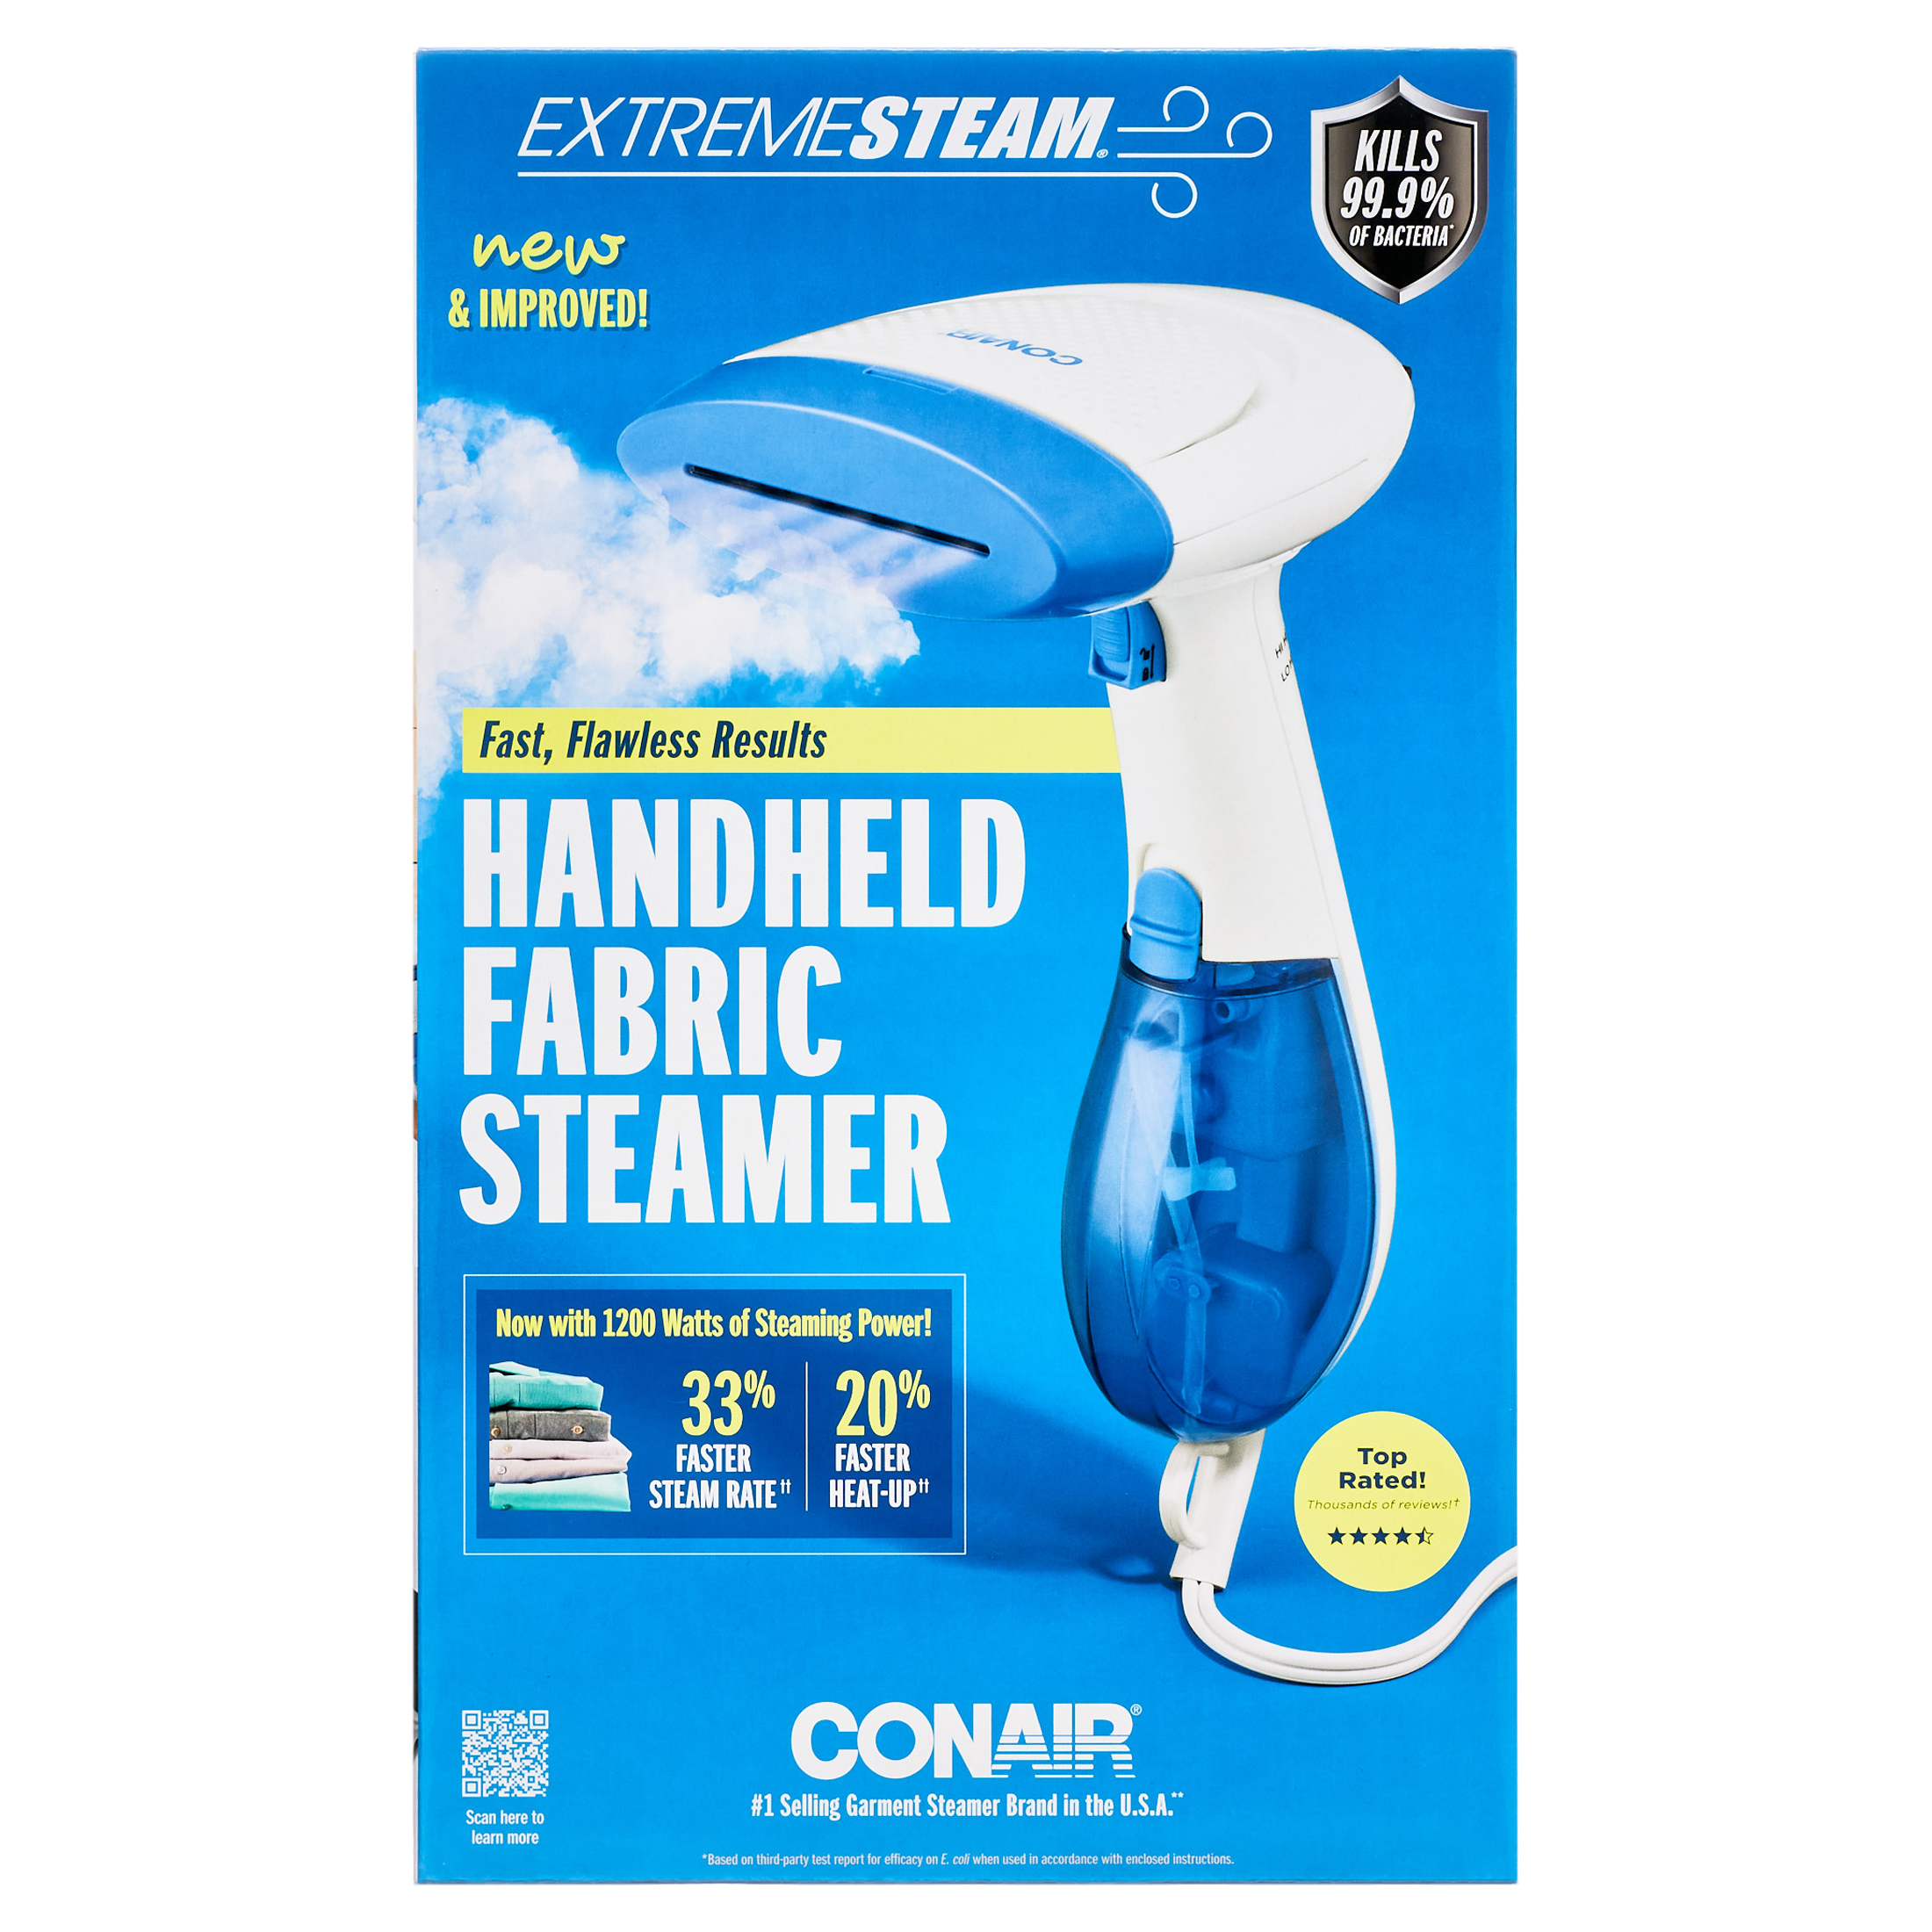 Conair Handheld Garment Steamer for Clothes, ExtremeSteam 1200W, Portable Handheld Design, White/Blue, GS237X - image 3 of 13